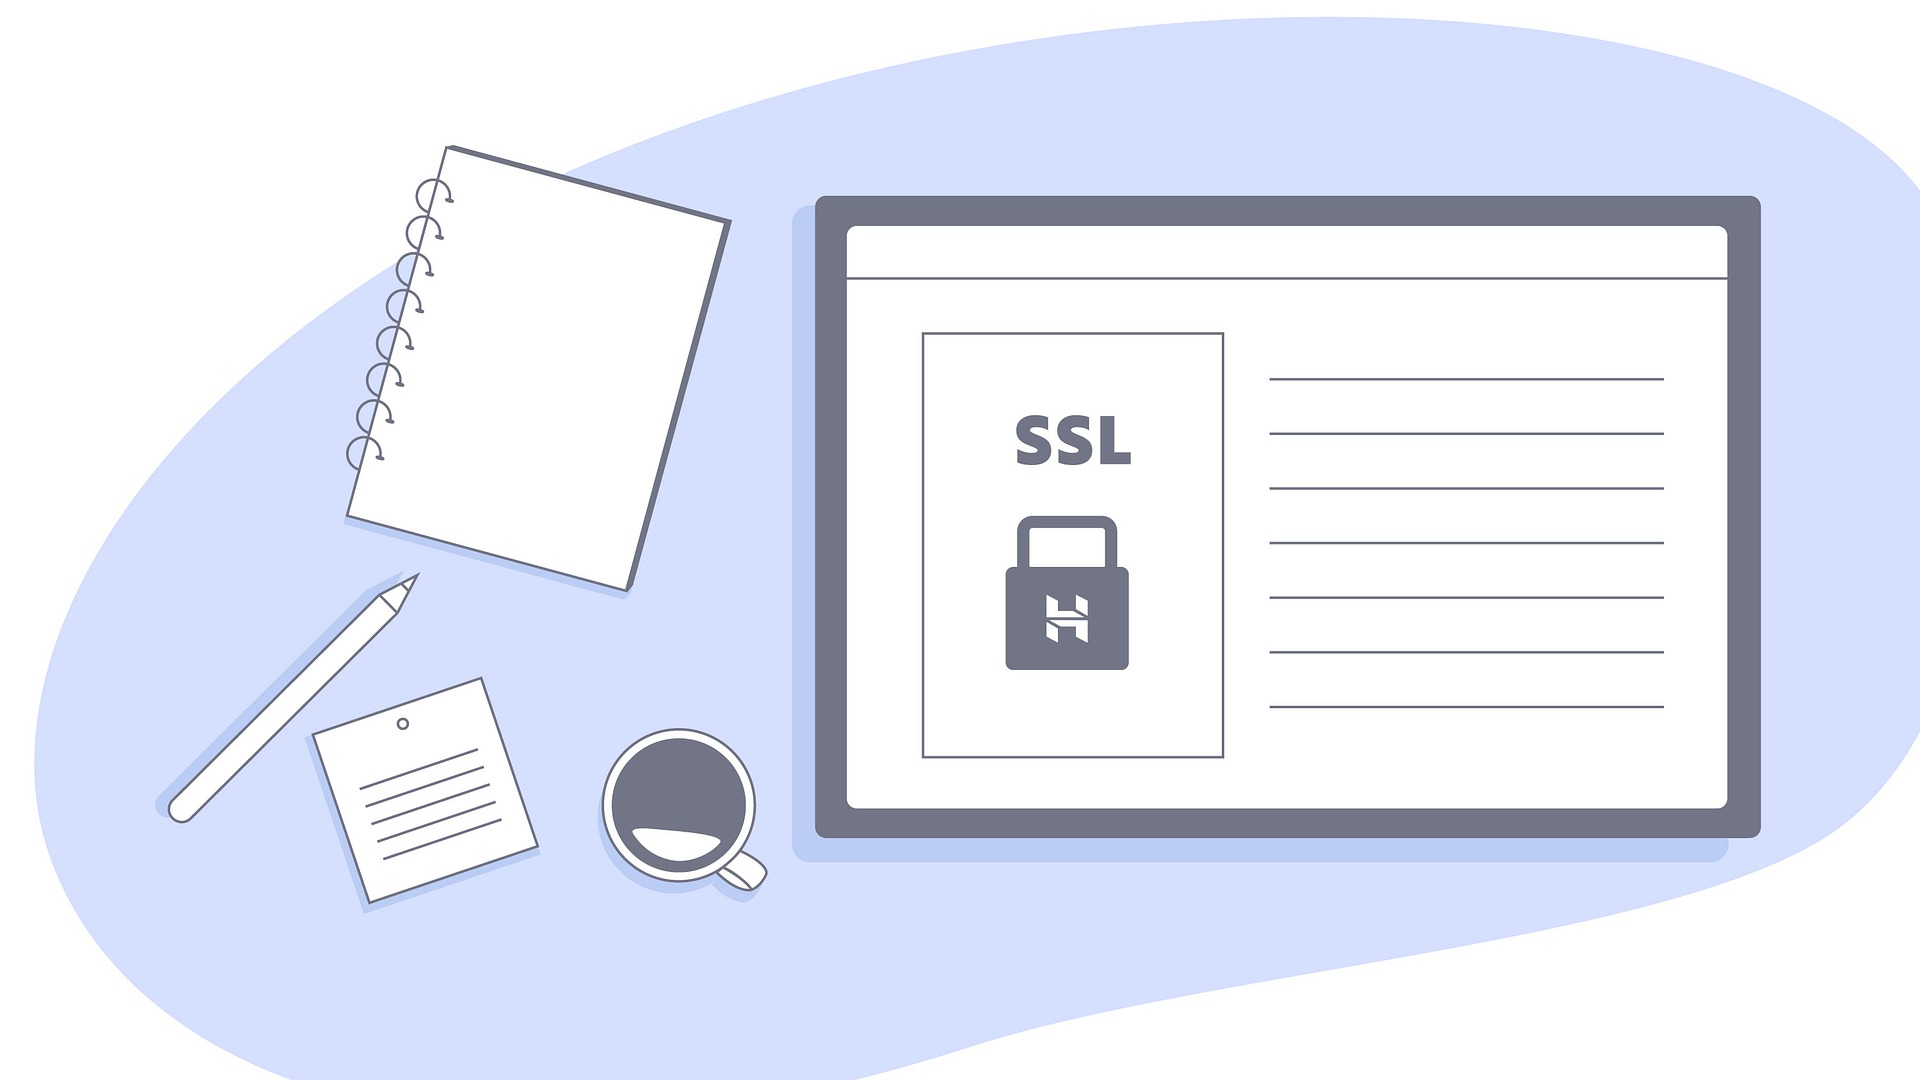 The ssl icon on the paper